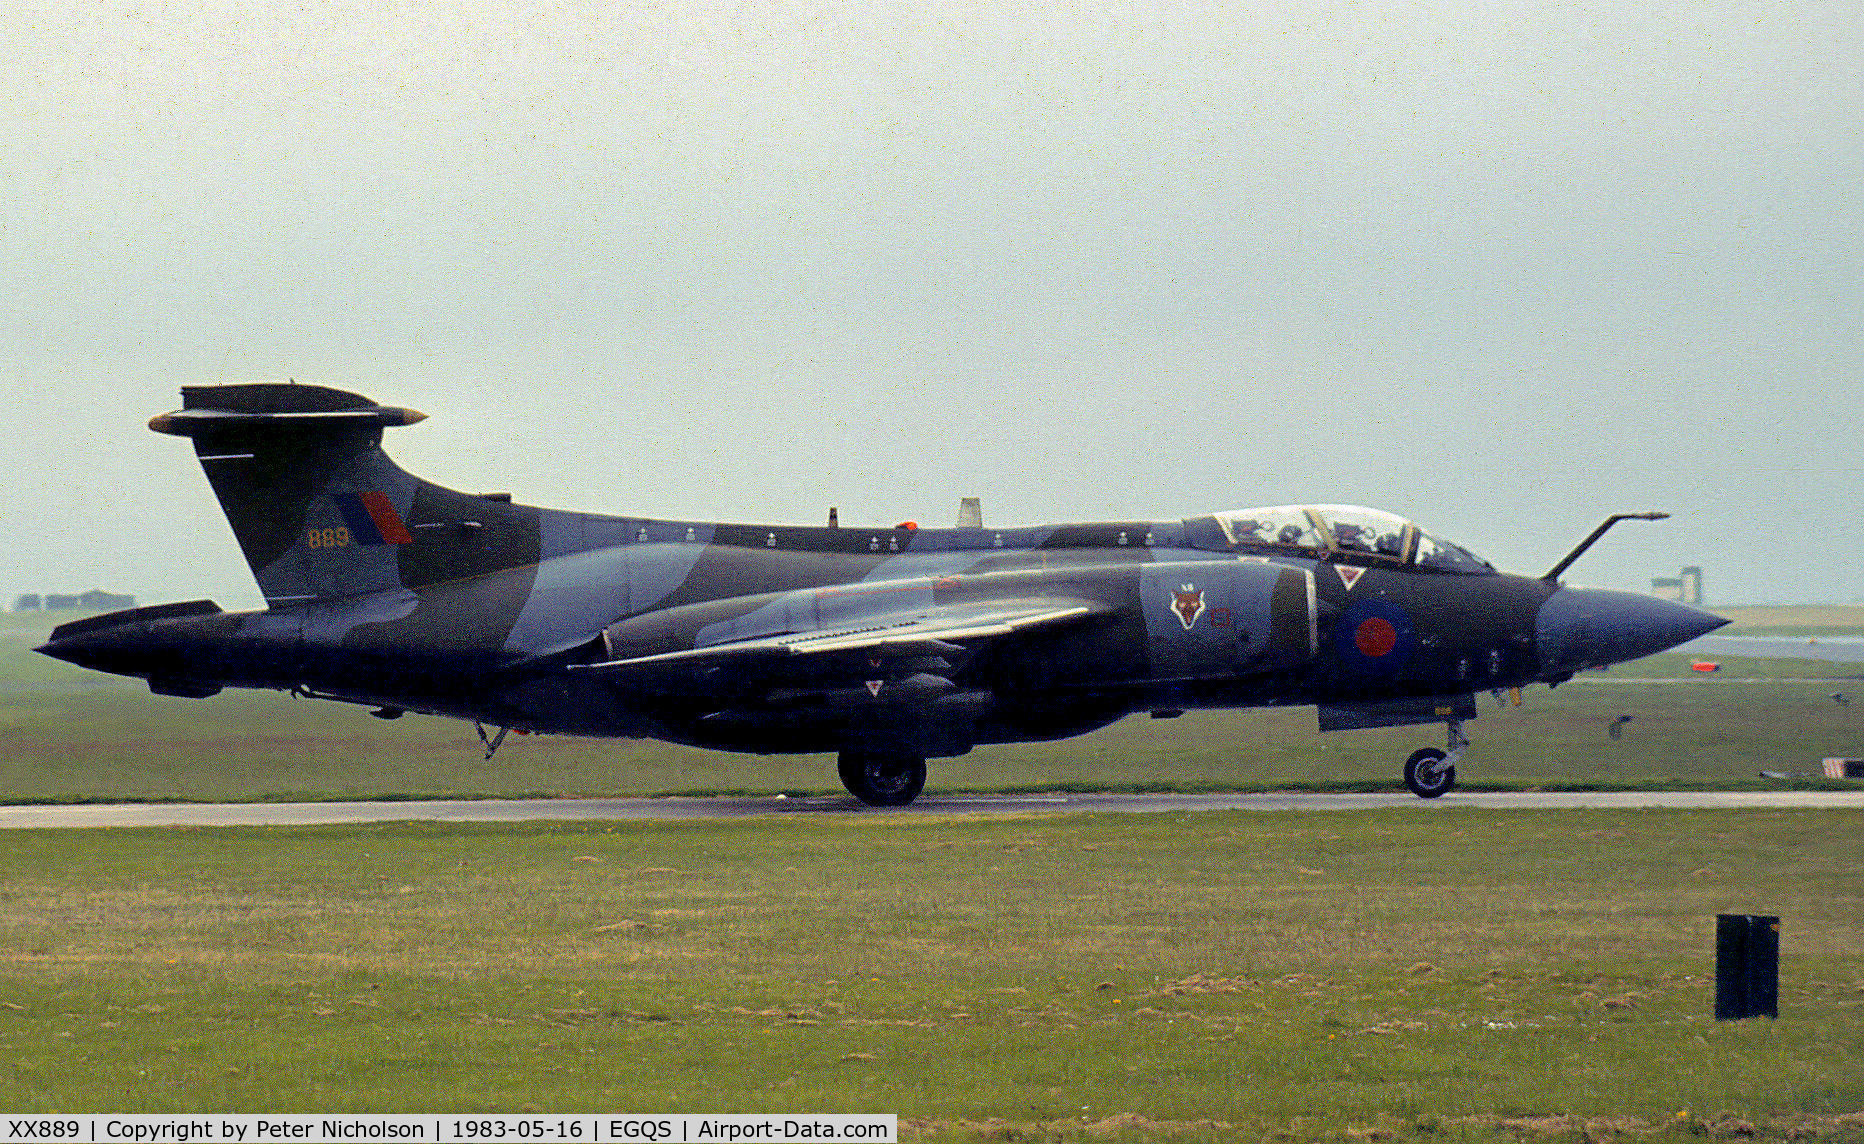 XX889, 1974 Hawker Siddeley Buccaneer S.2B C/N B3-05-73, Buccaneer S.2B of 12 Squadron preparing to join the active runway at RAF Lossiemouth in May 1983.